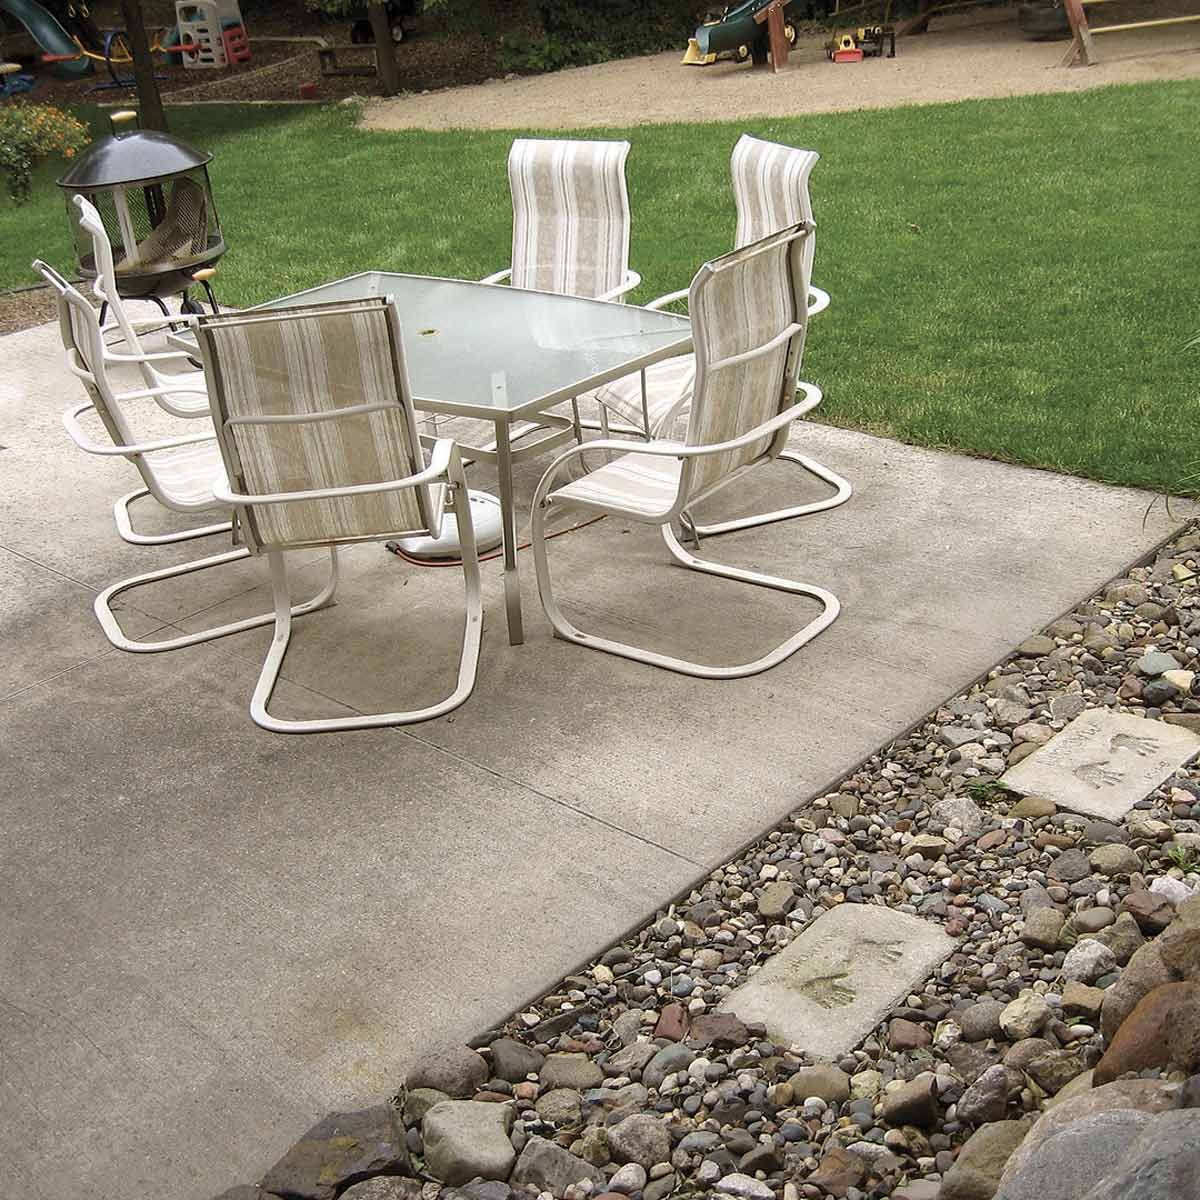 How to Cover a Concrete Patio With Pavers | Family Handyman